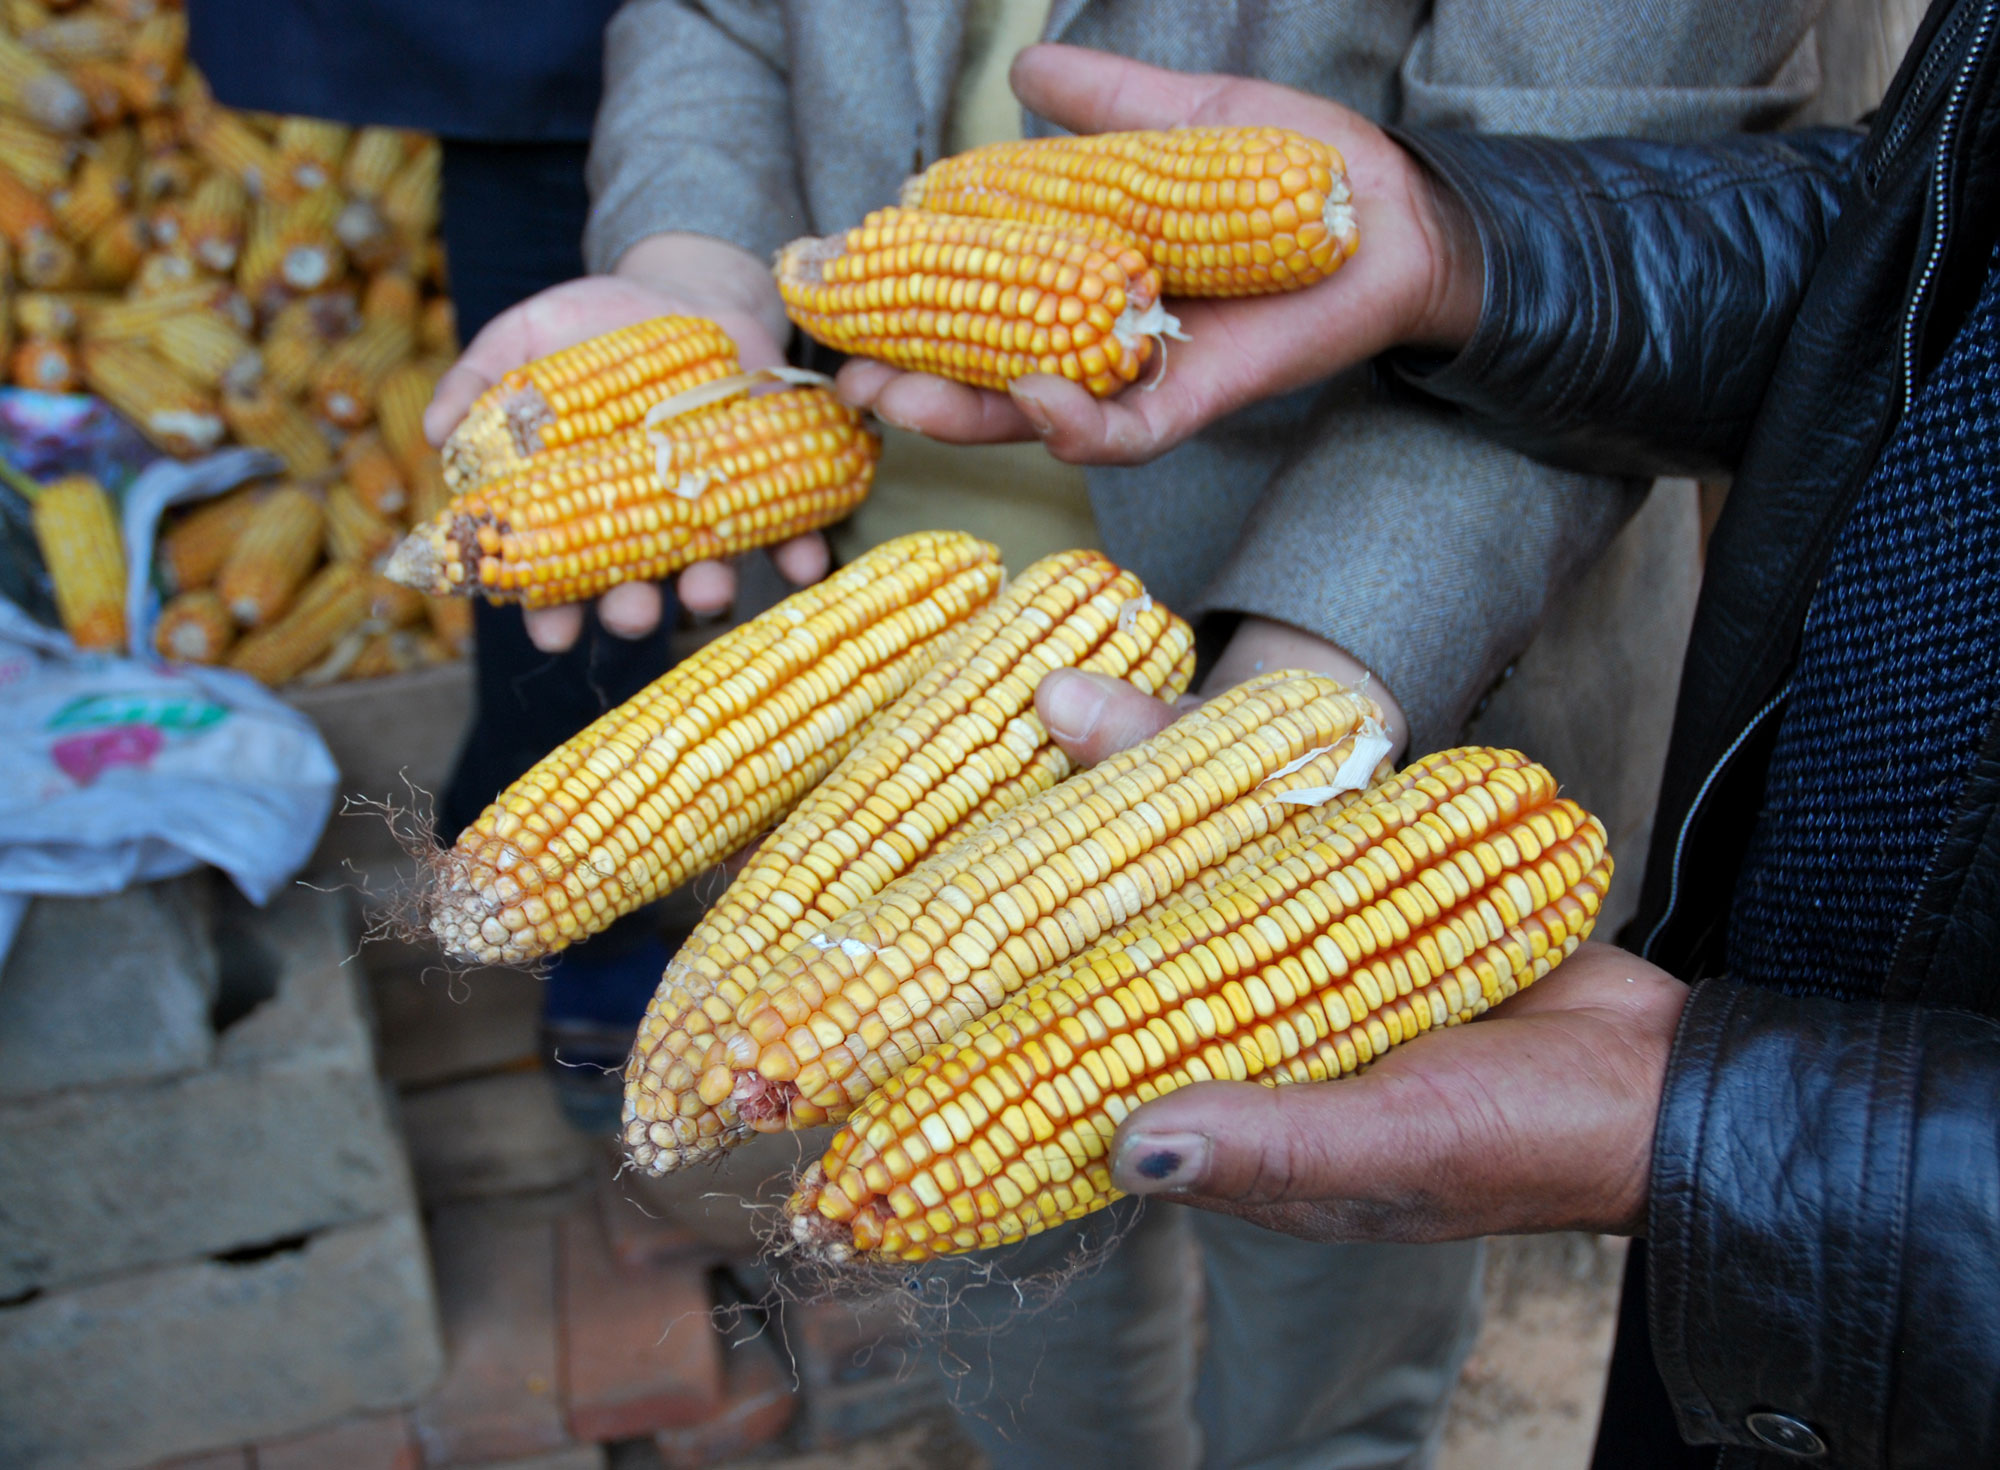 Photograph showing contrast between traditional and high-yielding hybrid maize varieties in China. The photo shows the hands of two people, each holding two ears of maize in each hand. The hybrid ears are much longer than the ears of the traditional maize variety.